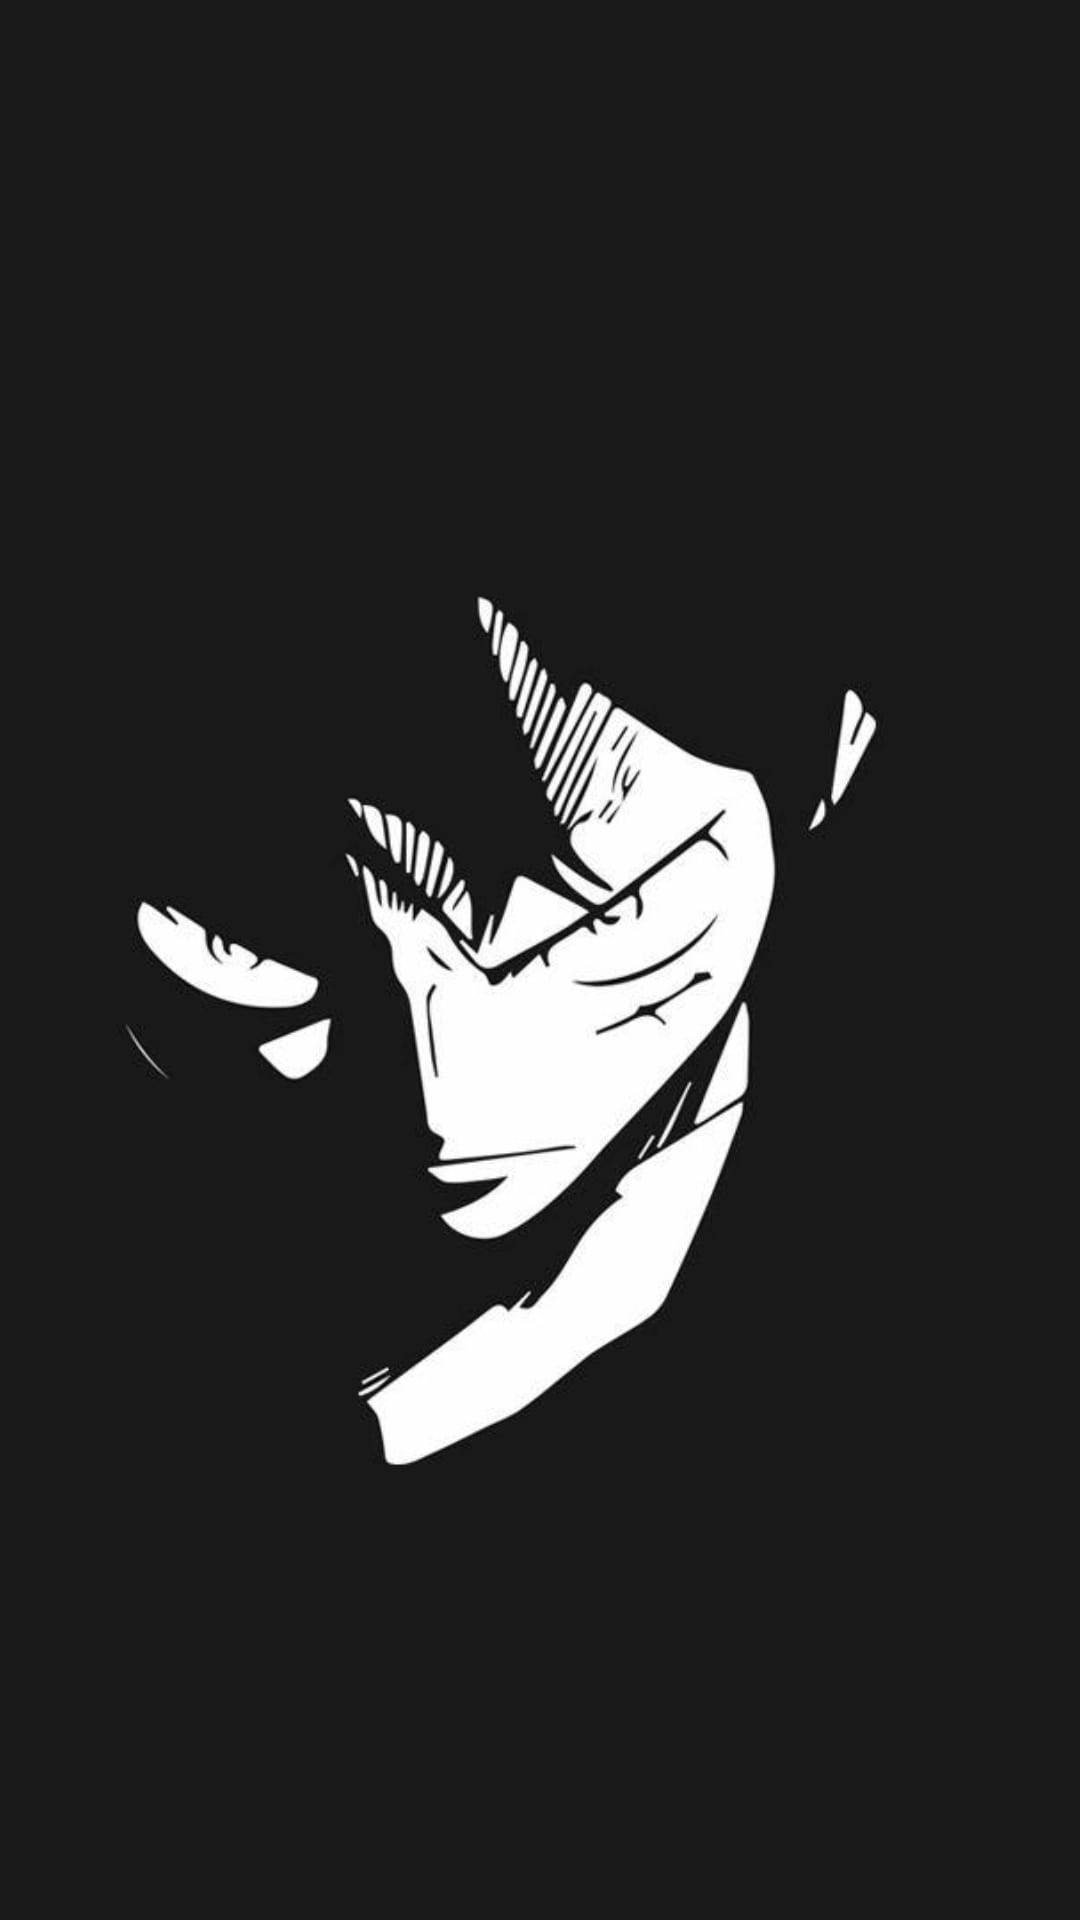 Larger than Life - Angry Luffy PFP in Majestic Black and White Illustration Wallpaper